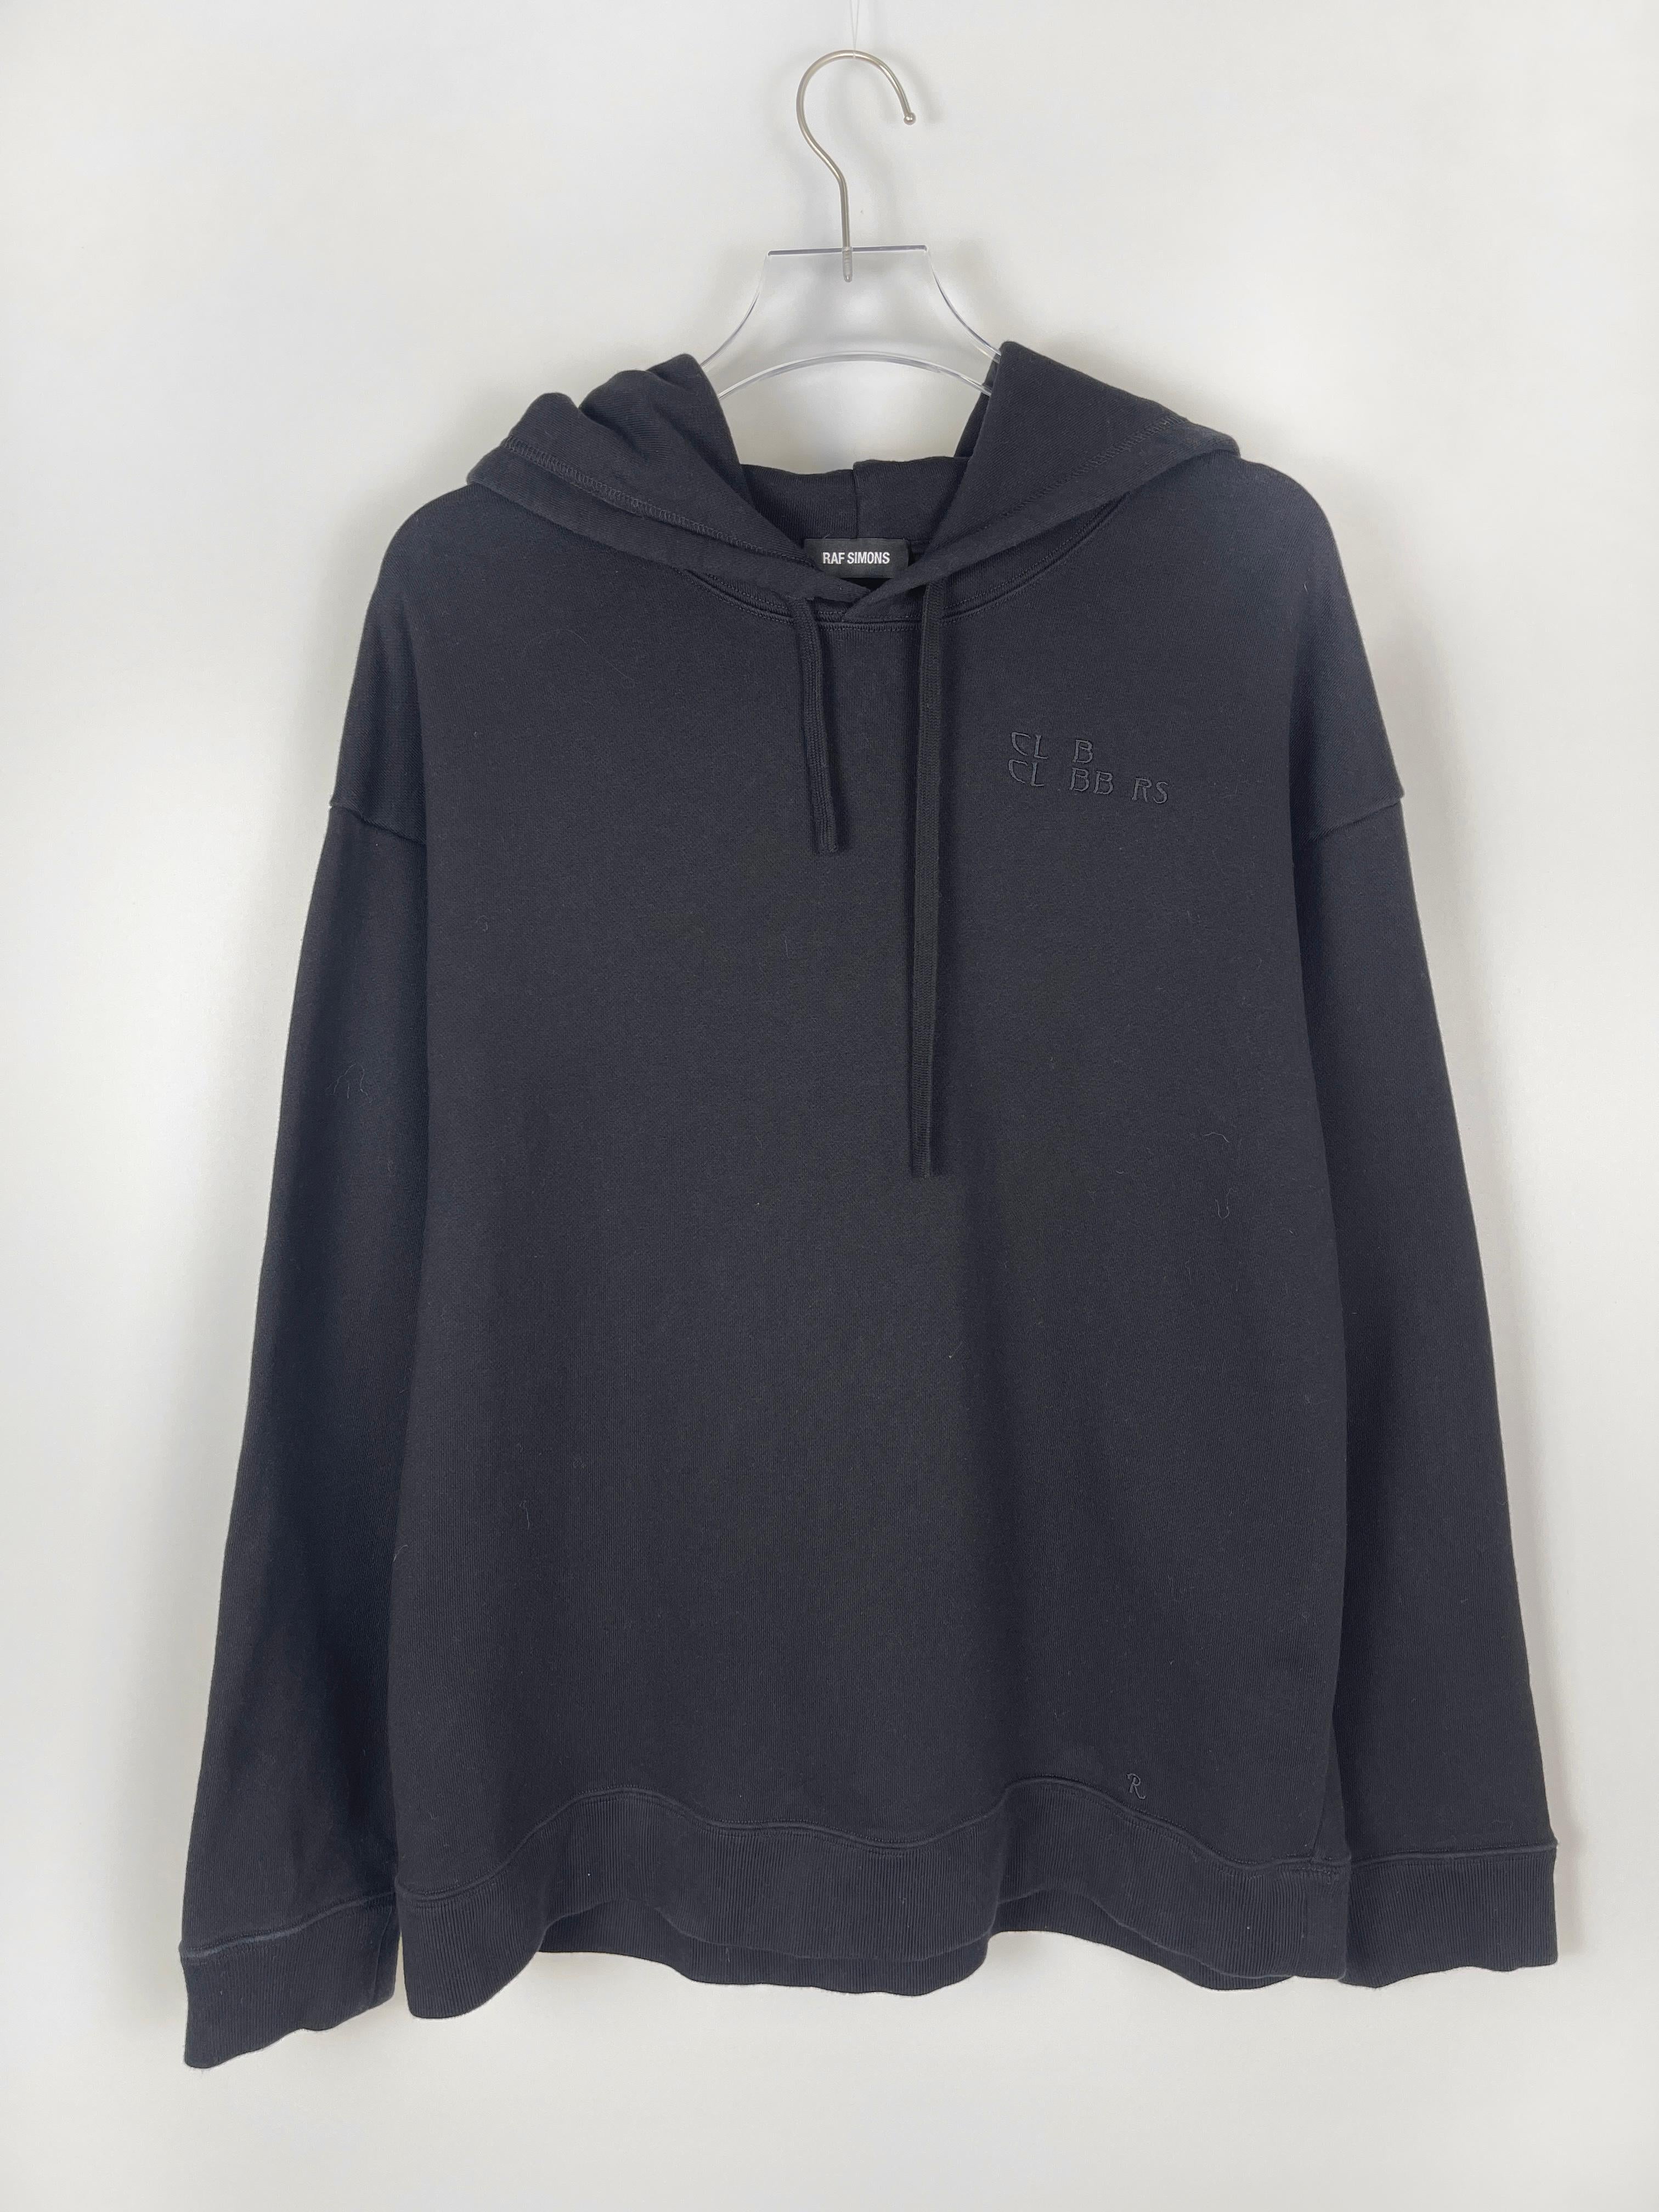 Size: M, Raf Simons hoodie are made for an oversized fits.

Condition: The piece is in near pristine condition. Every piece from our collection is in near pristine condition. Exceptional otherwise will be noted

Please feels free to message us with